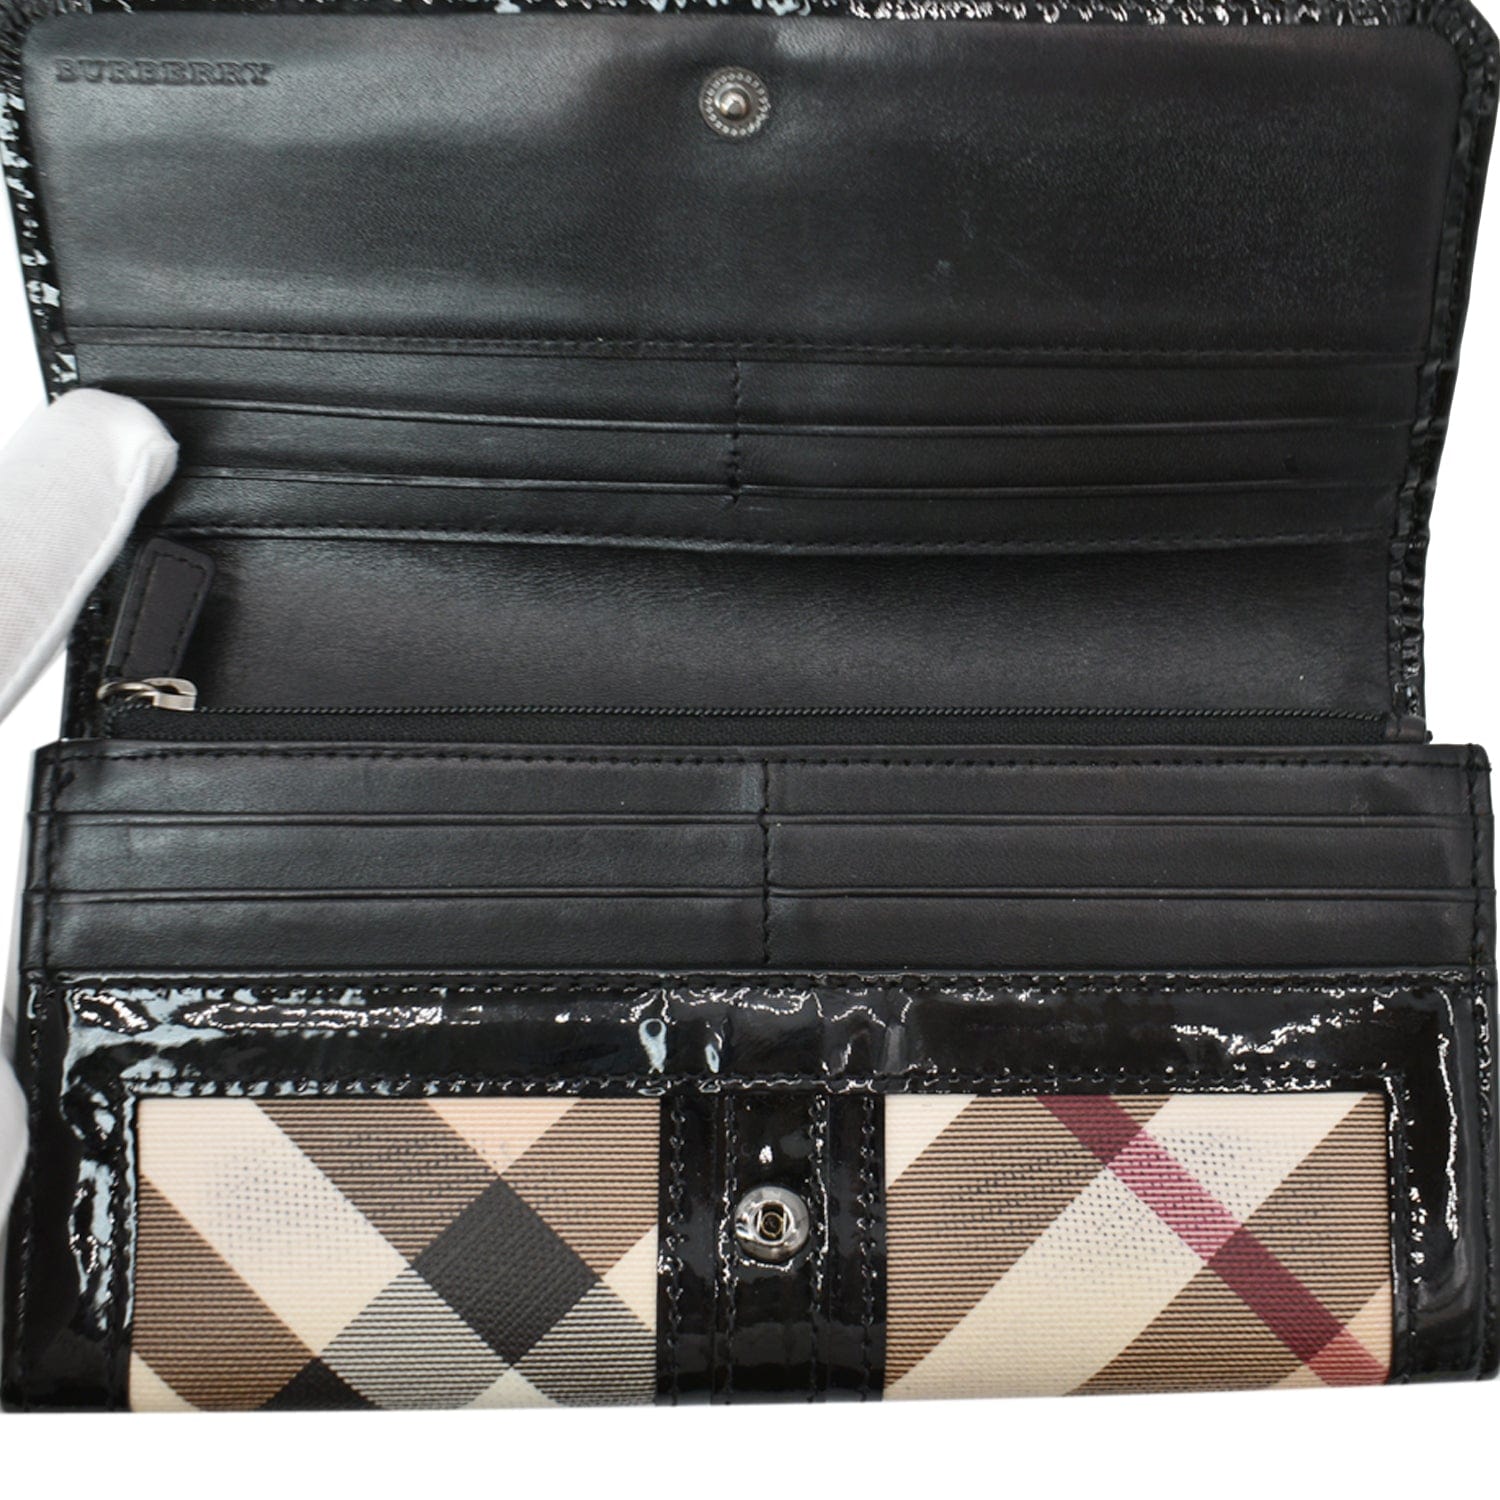 Burberry Metallic/Beige Housecheck PVC and Patent Leather French Wallet  Burberry | The Luxury Closet